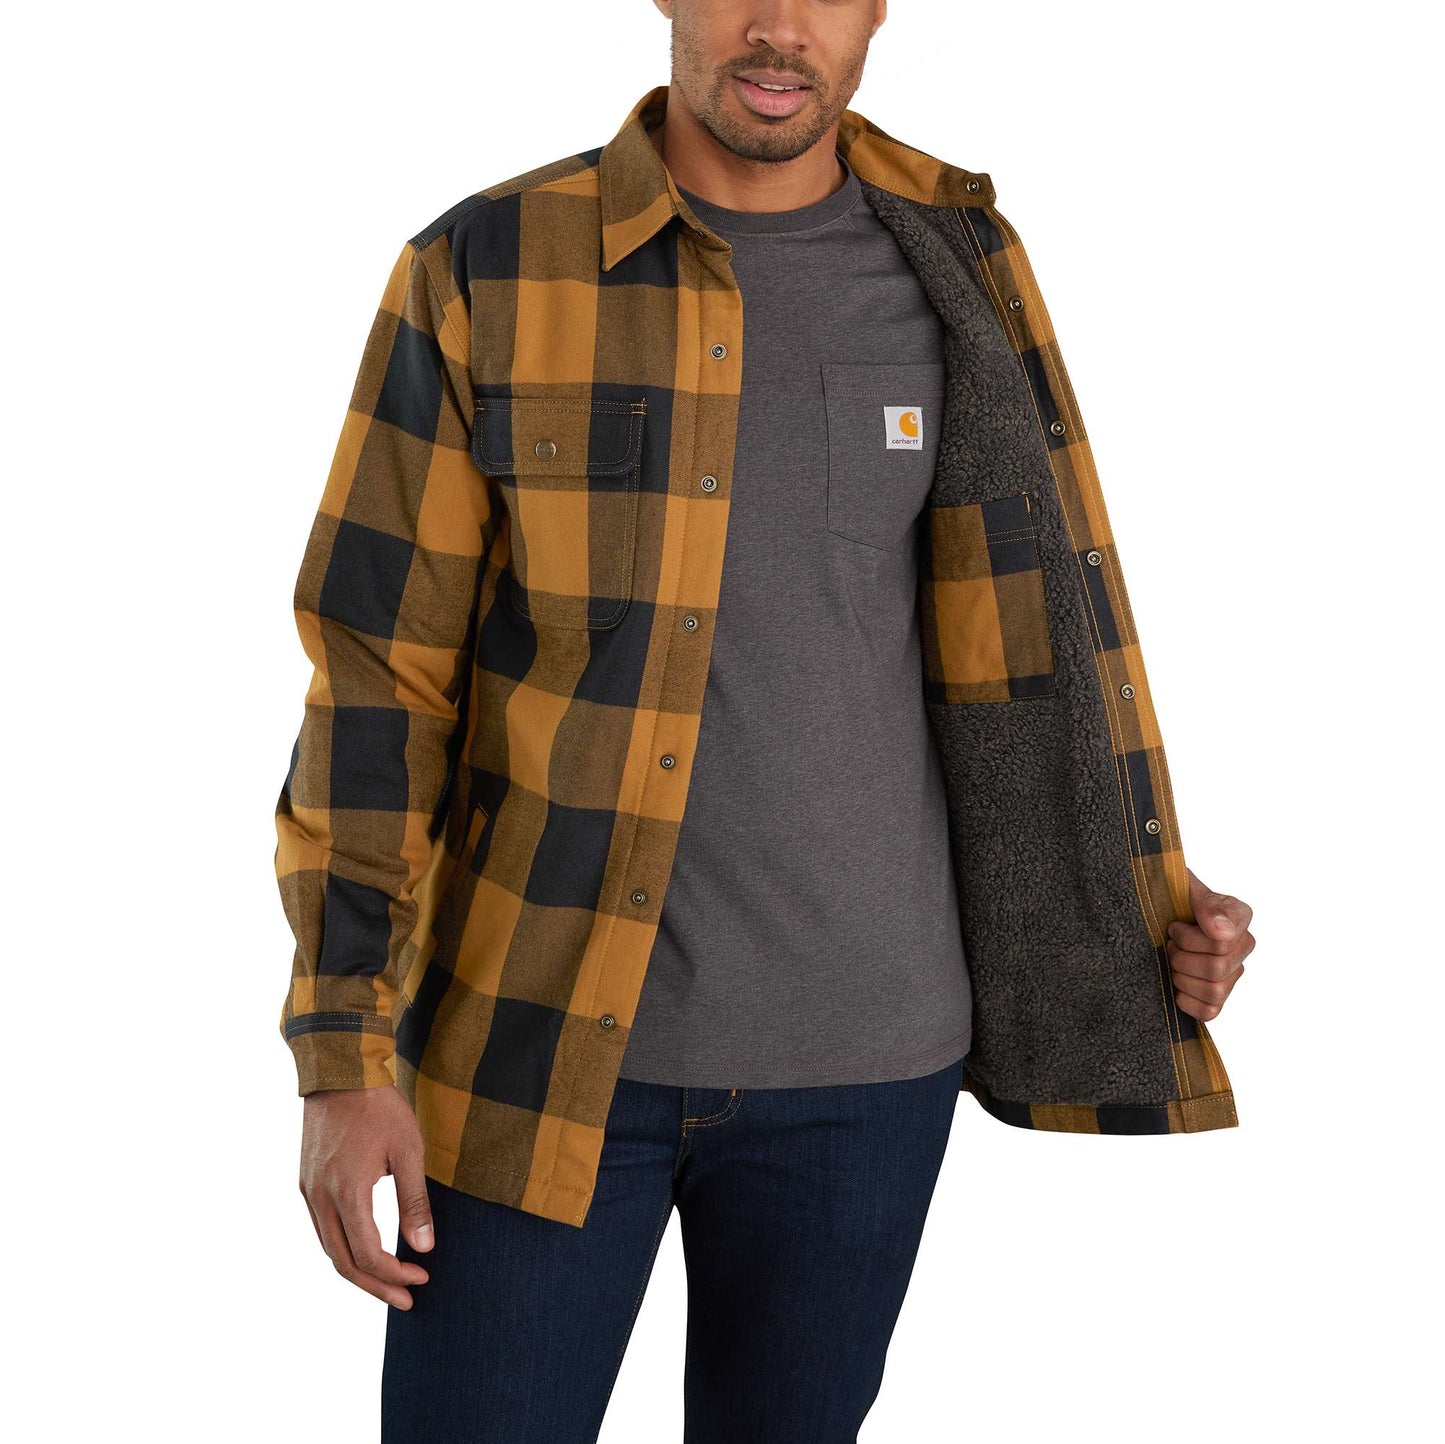 Men's Heavyweight Canvas Flannel Lined Shirt Jacket, Black, Small